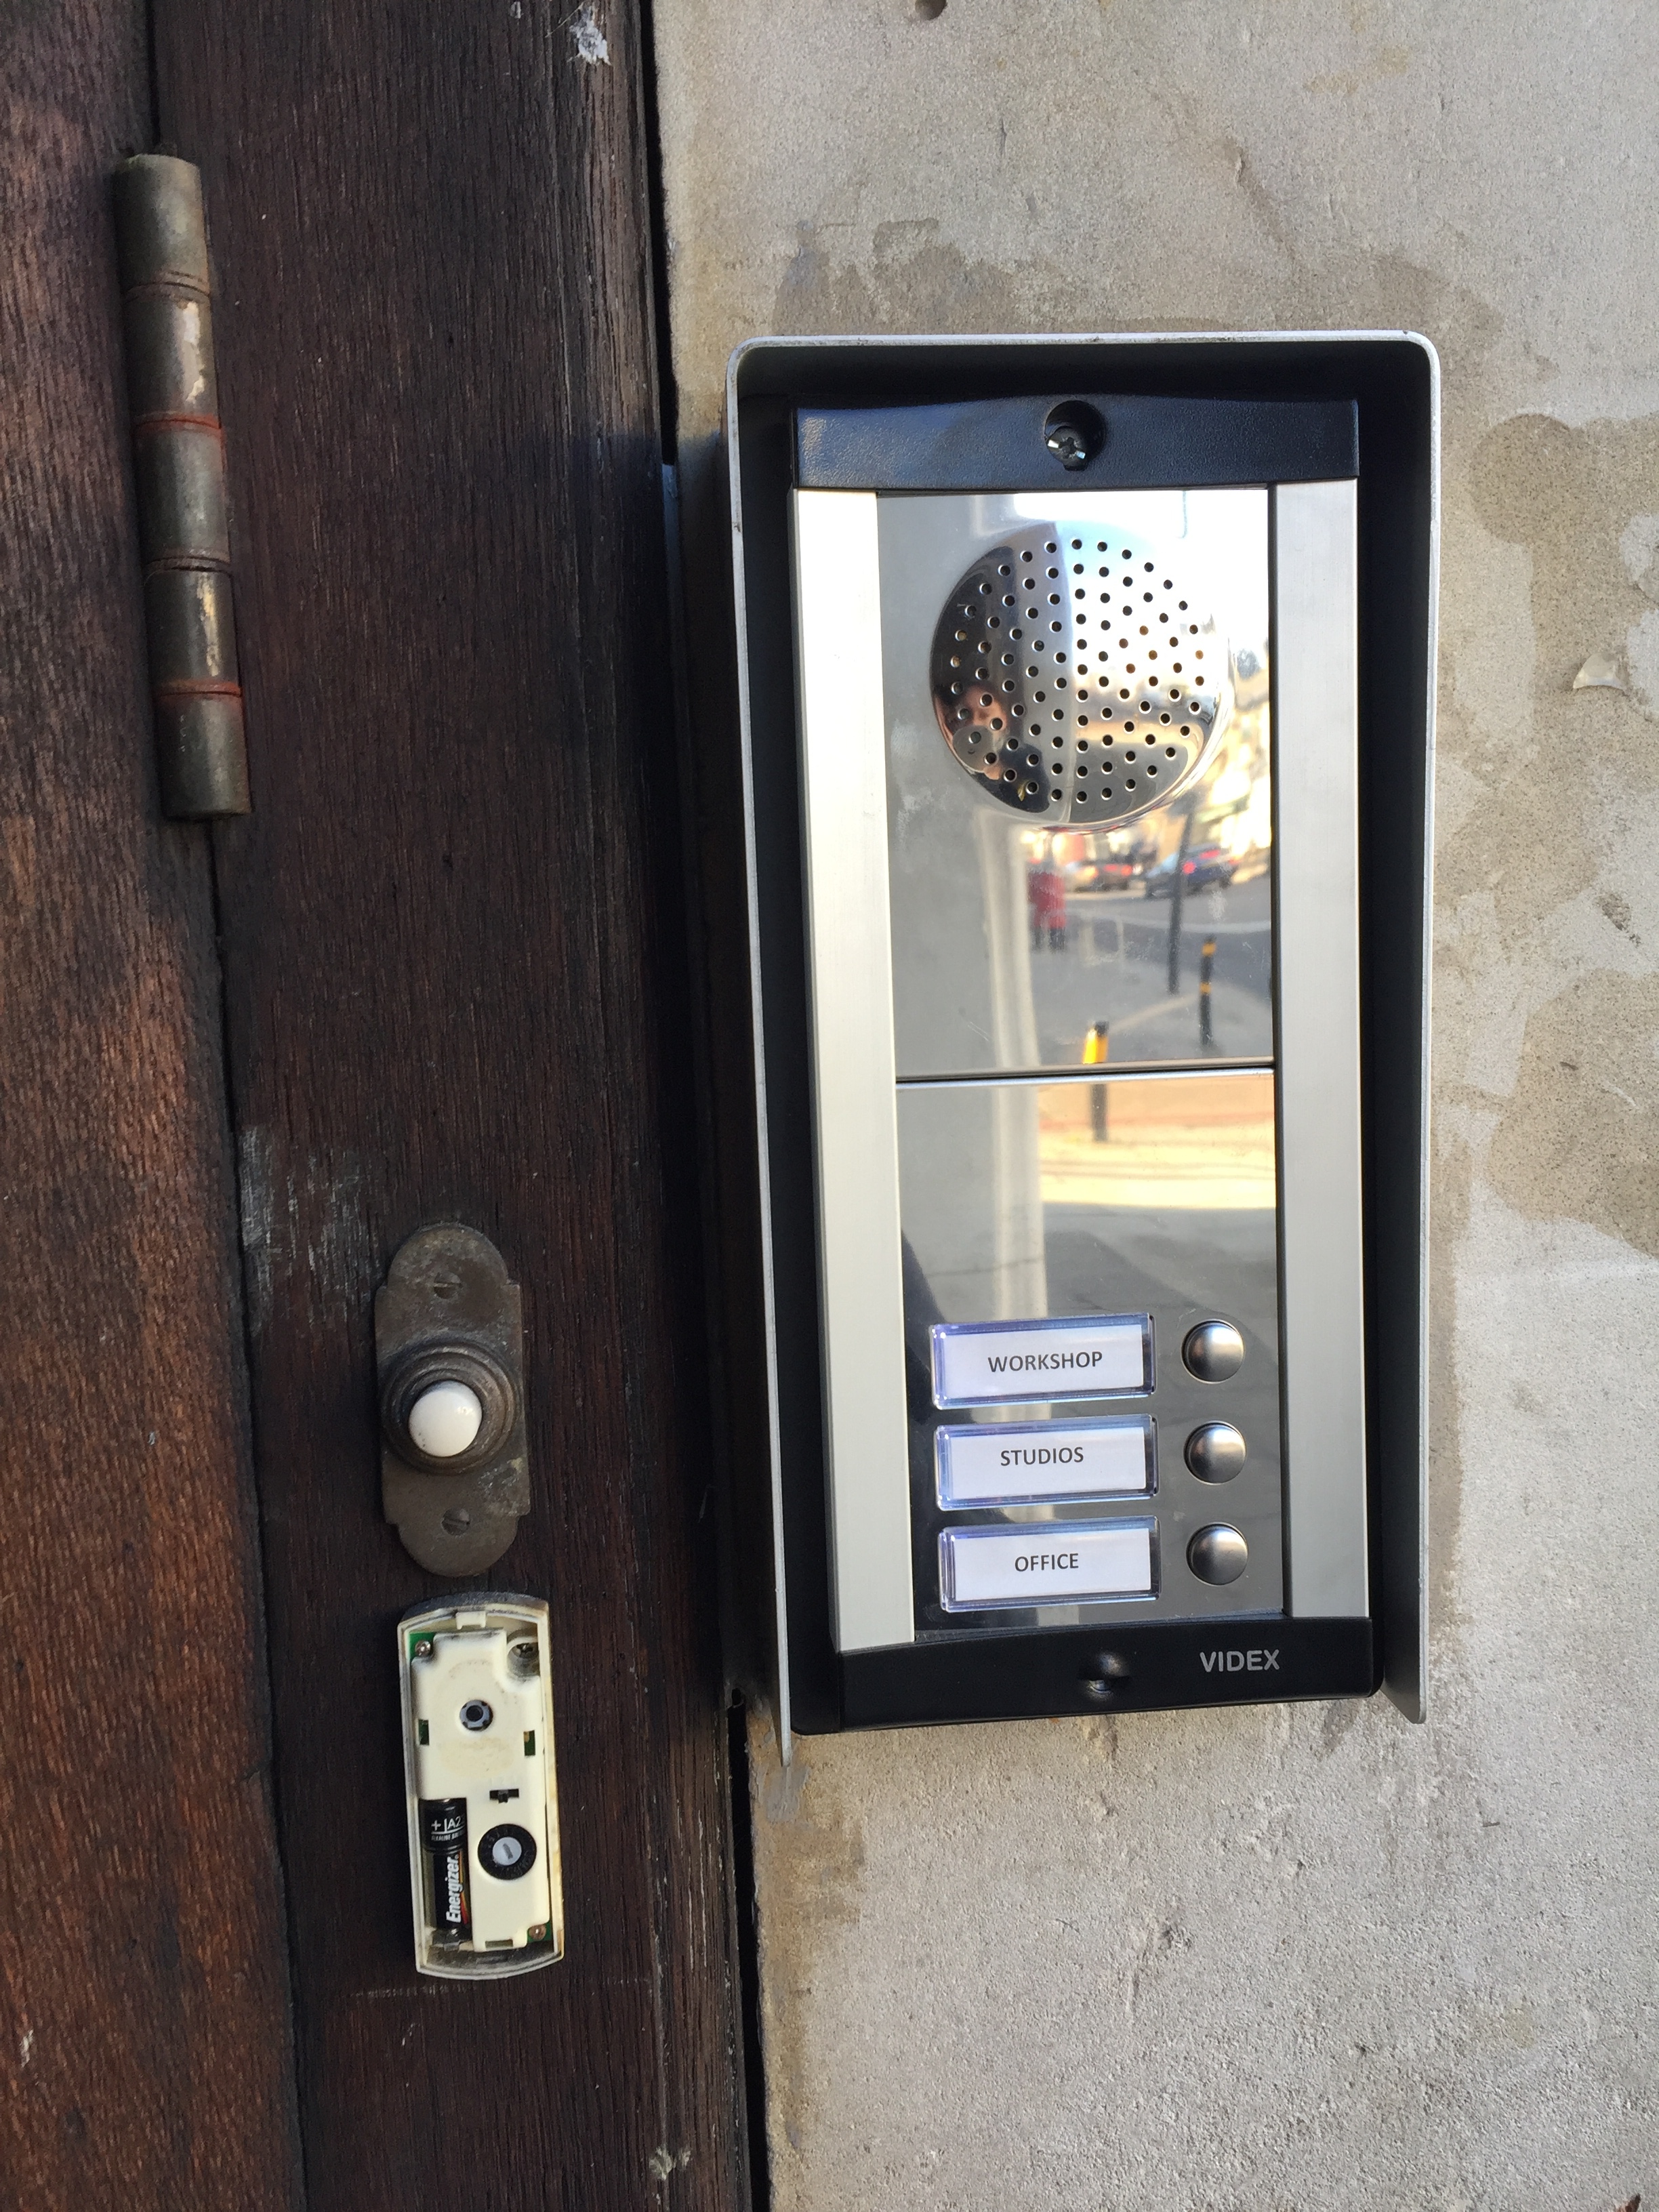 Encountering Temporality IV: Doorbells as Anticipatory Devices